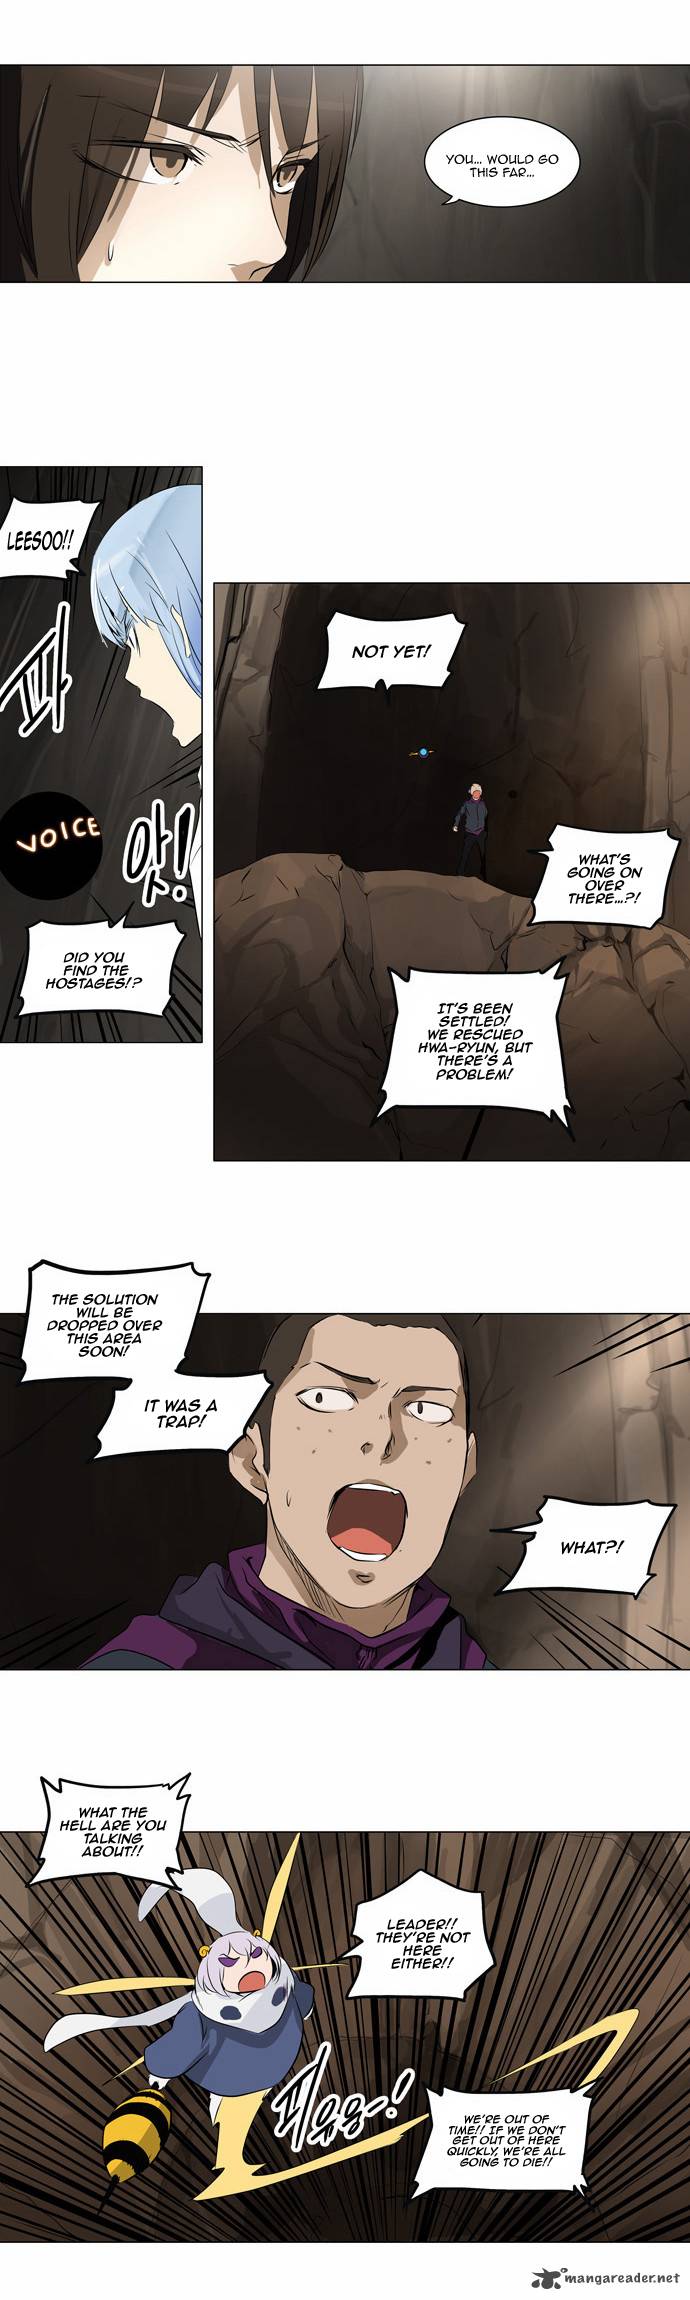 Tower Of God 185 13